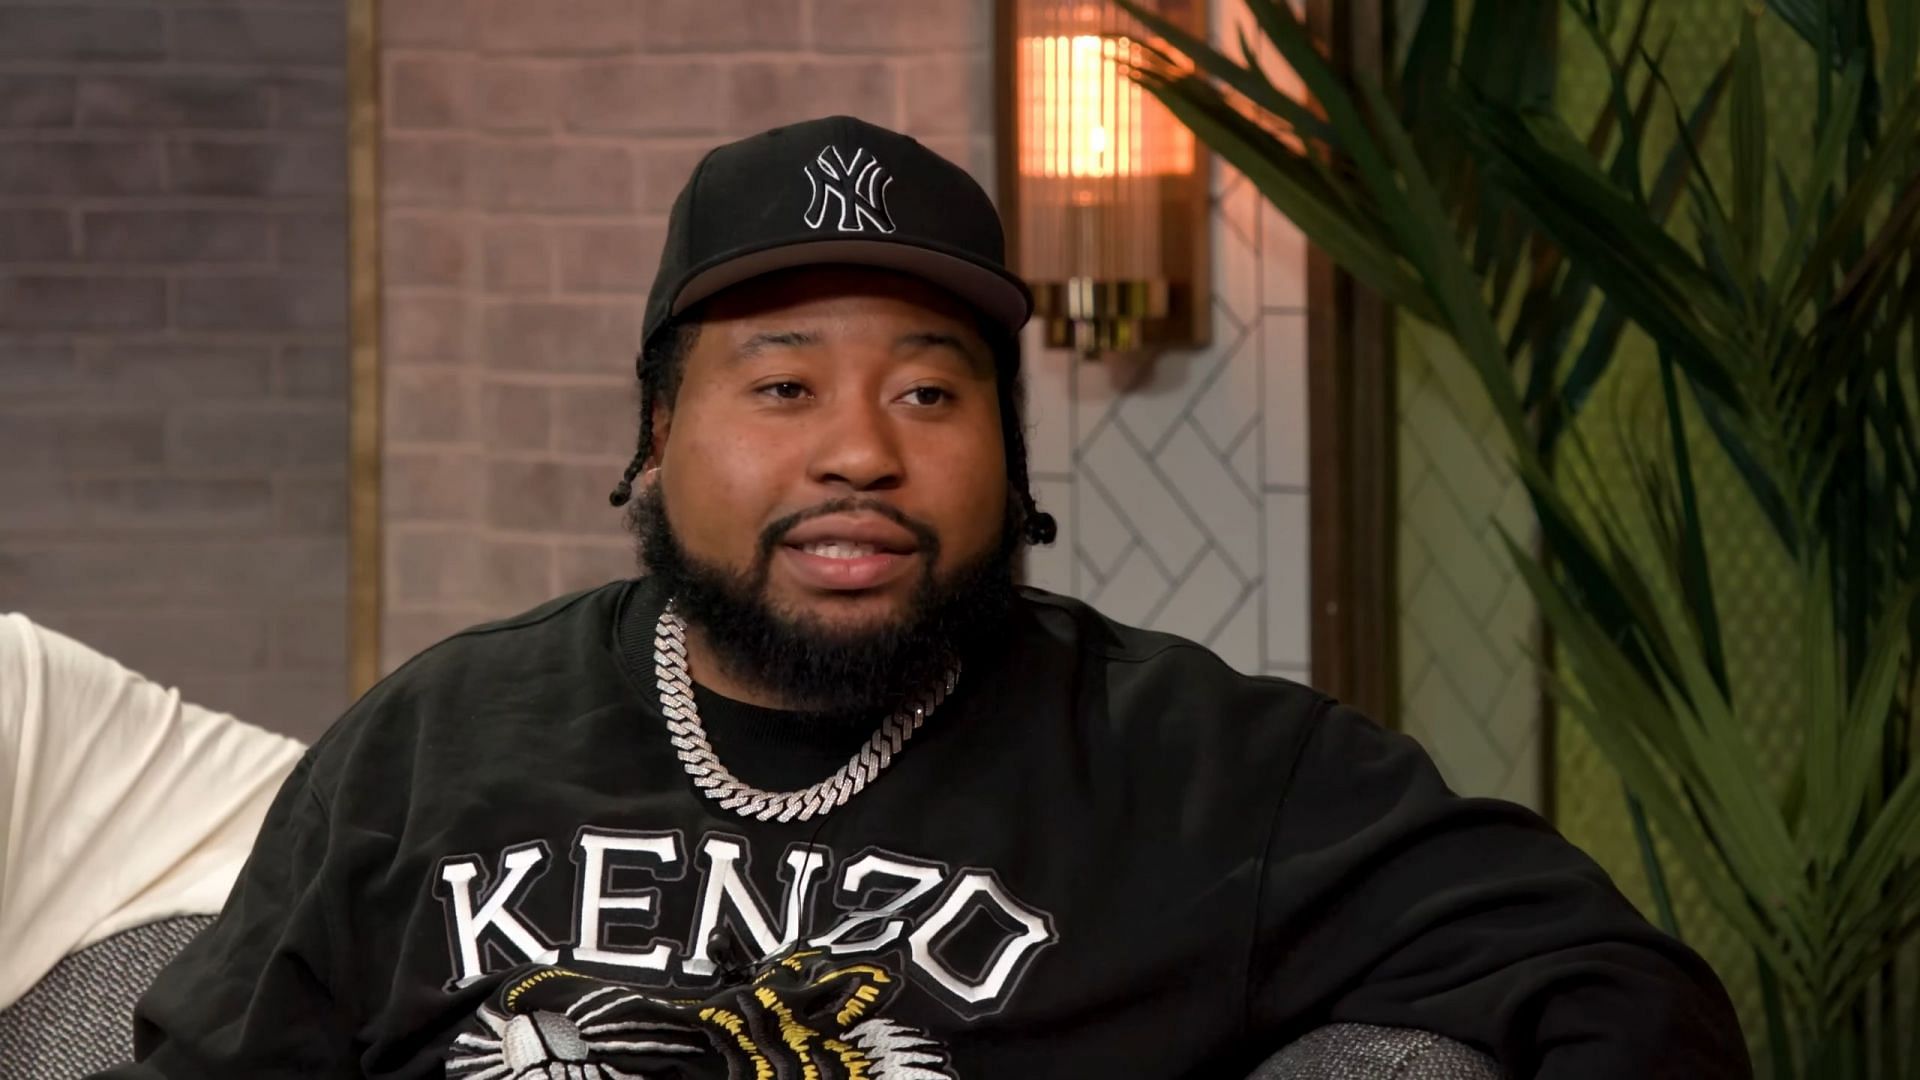 DJ Akademiks is being sued for sexual assault (Image via FLAGRANT/YouTube)